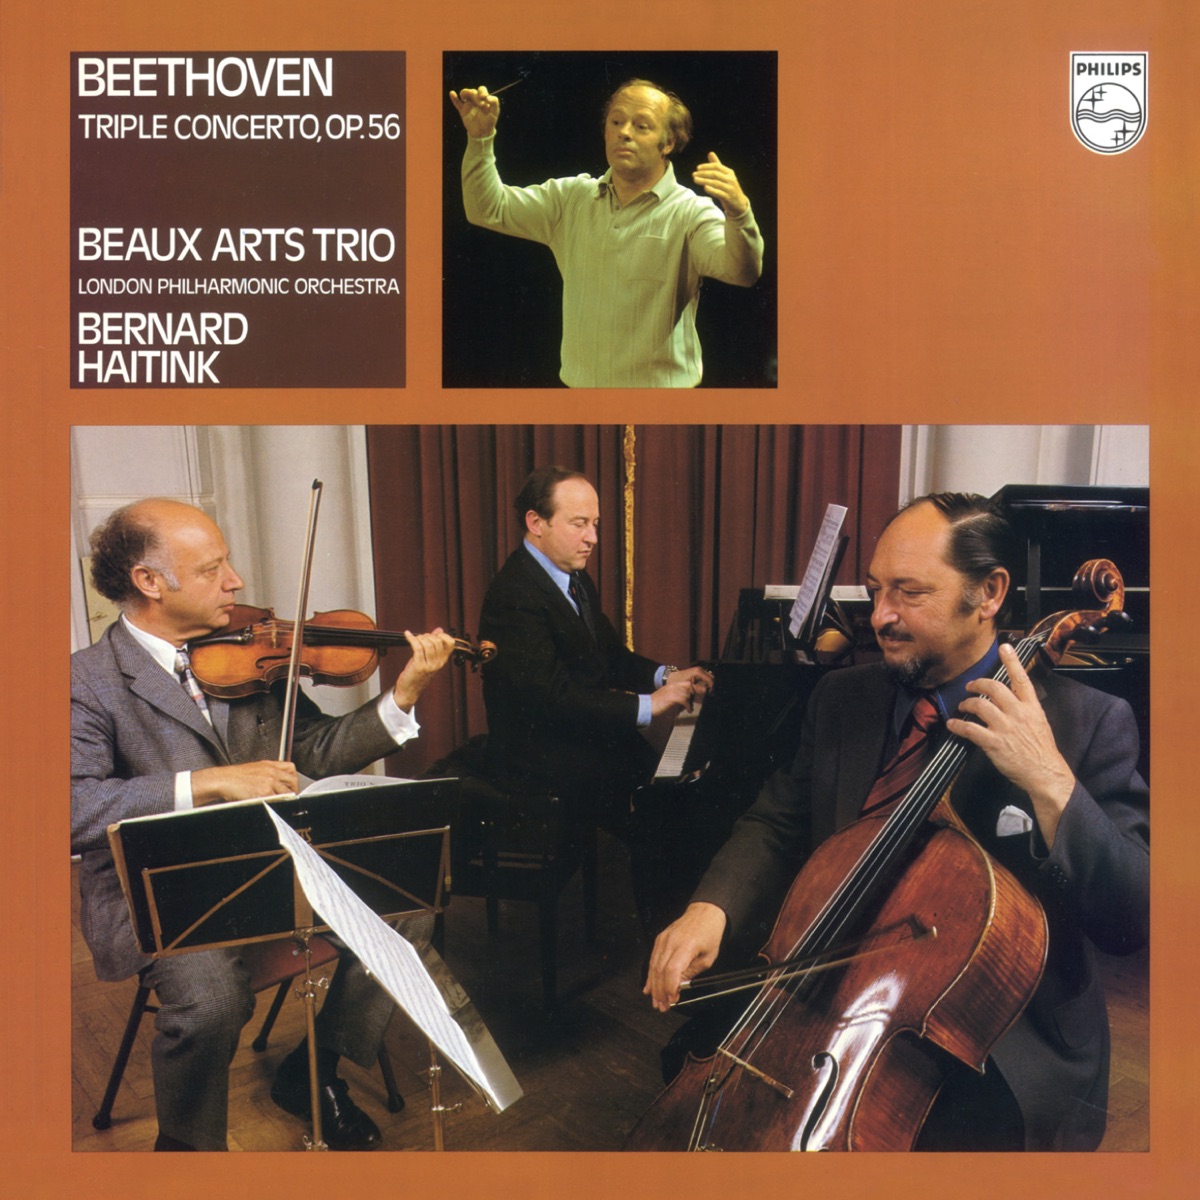 Beethoven: Triple Concerto, Op. 36 by Beaux Arts Trio, London Philharmonic  Orchestra & Bernard Haitink on Apple Music